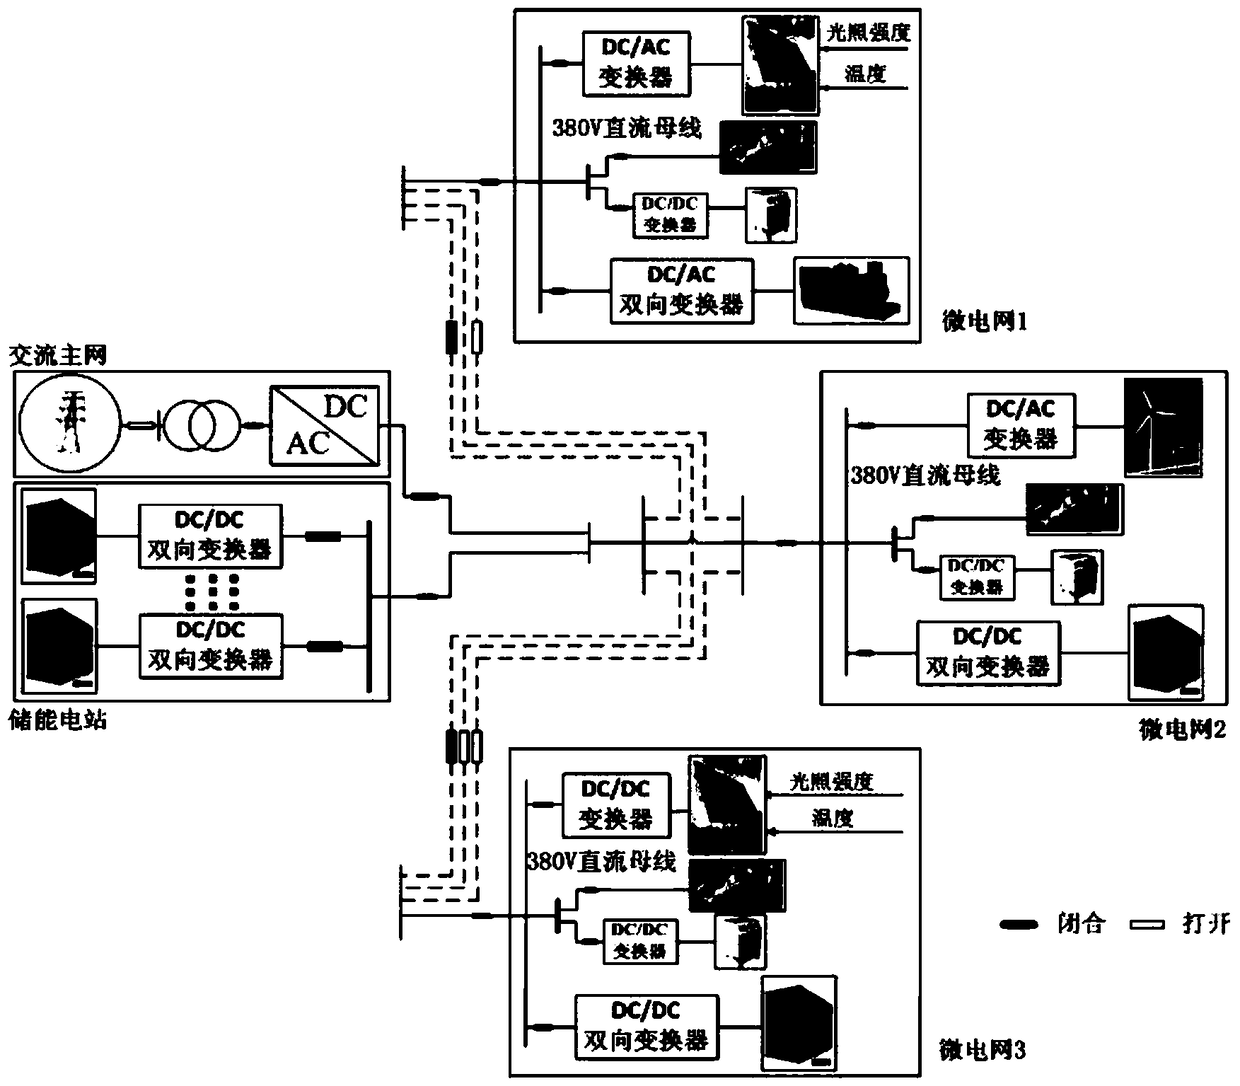 A DC microgrid group energy storage optimization and coordinated control method